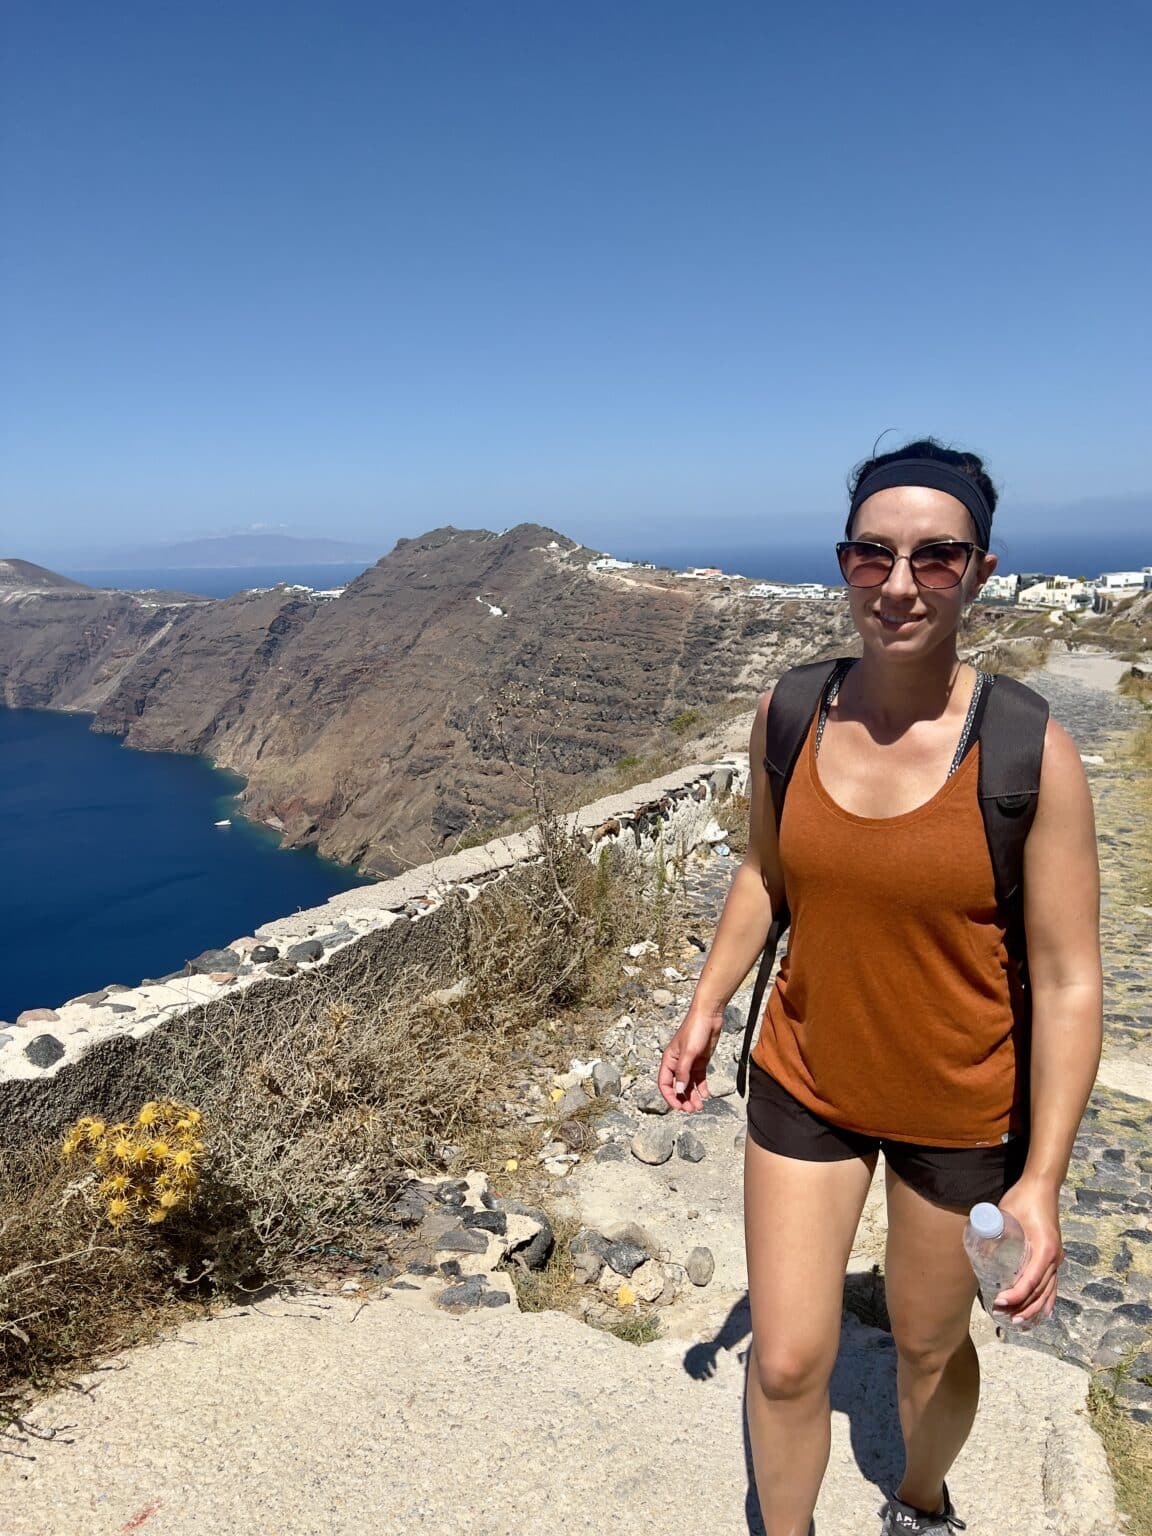 Lindsey wearing a burnt orange tank top and black shorts hiking in Santorini on a clear sunny day